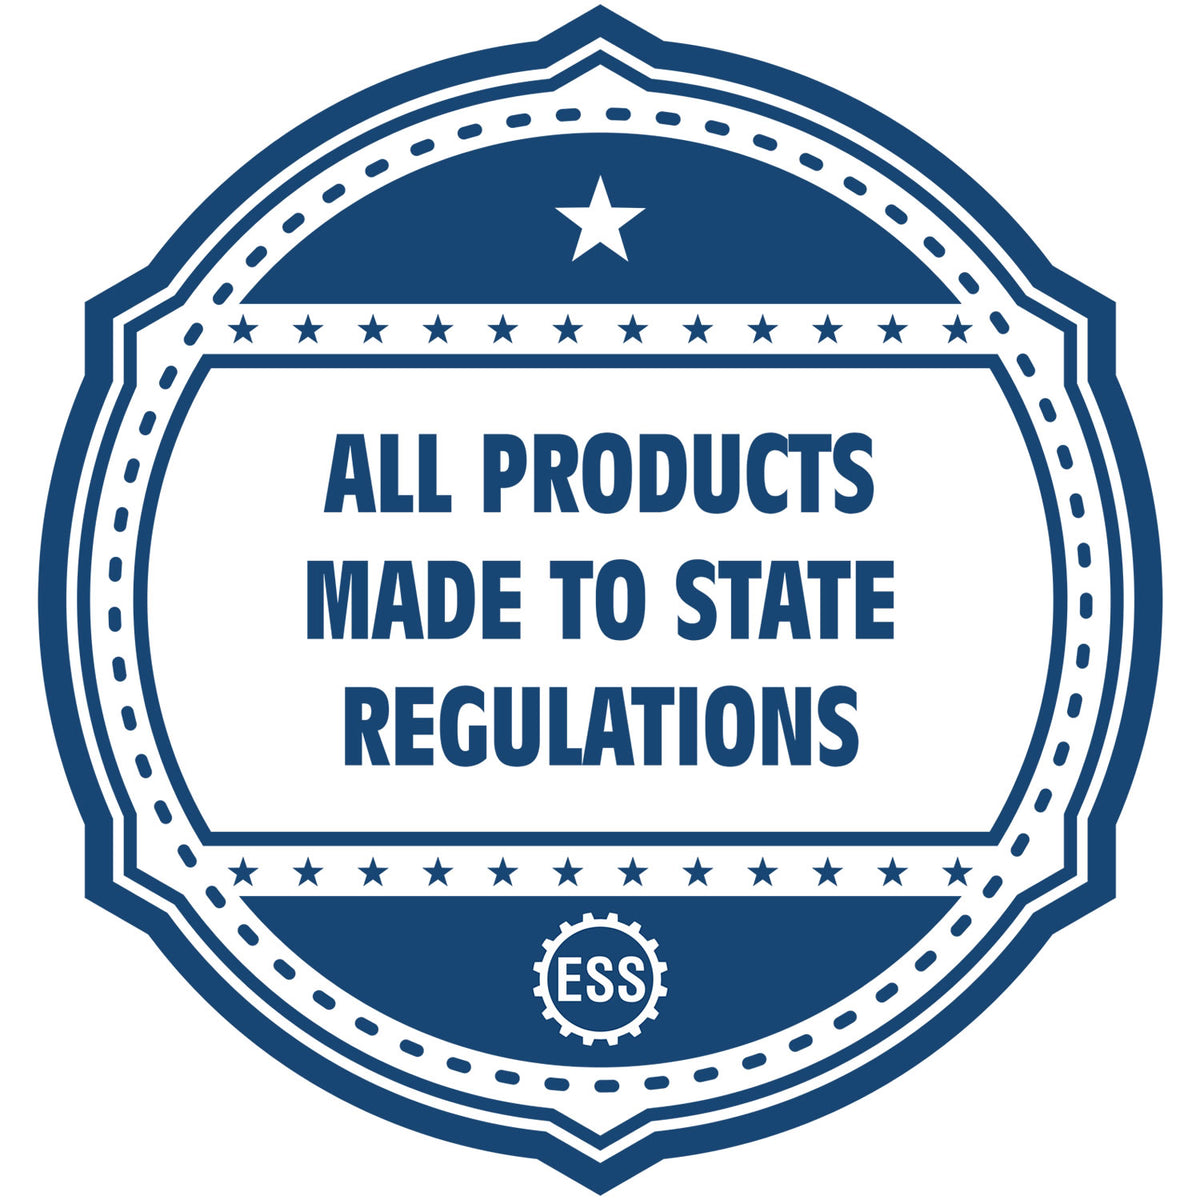 An icon or badge element for the State of New Jersey Long Reach Architectural Embossing Seal showing that this product is made in compliance with state regulations.